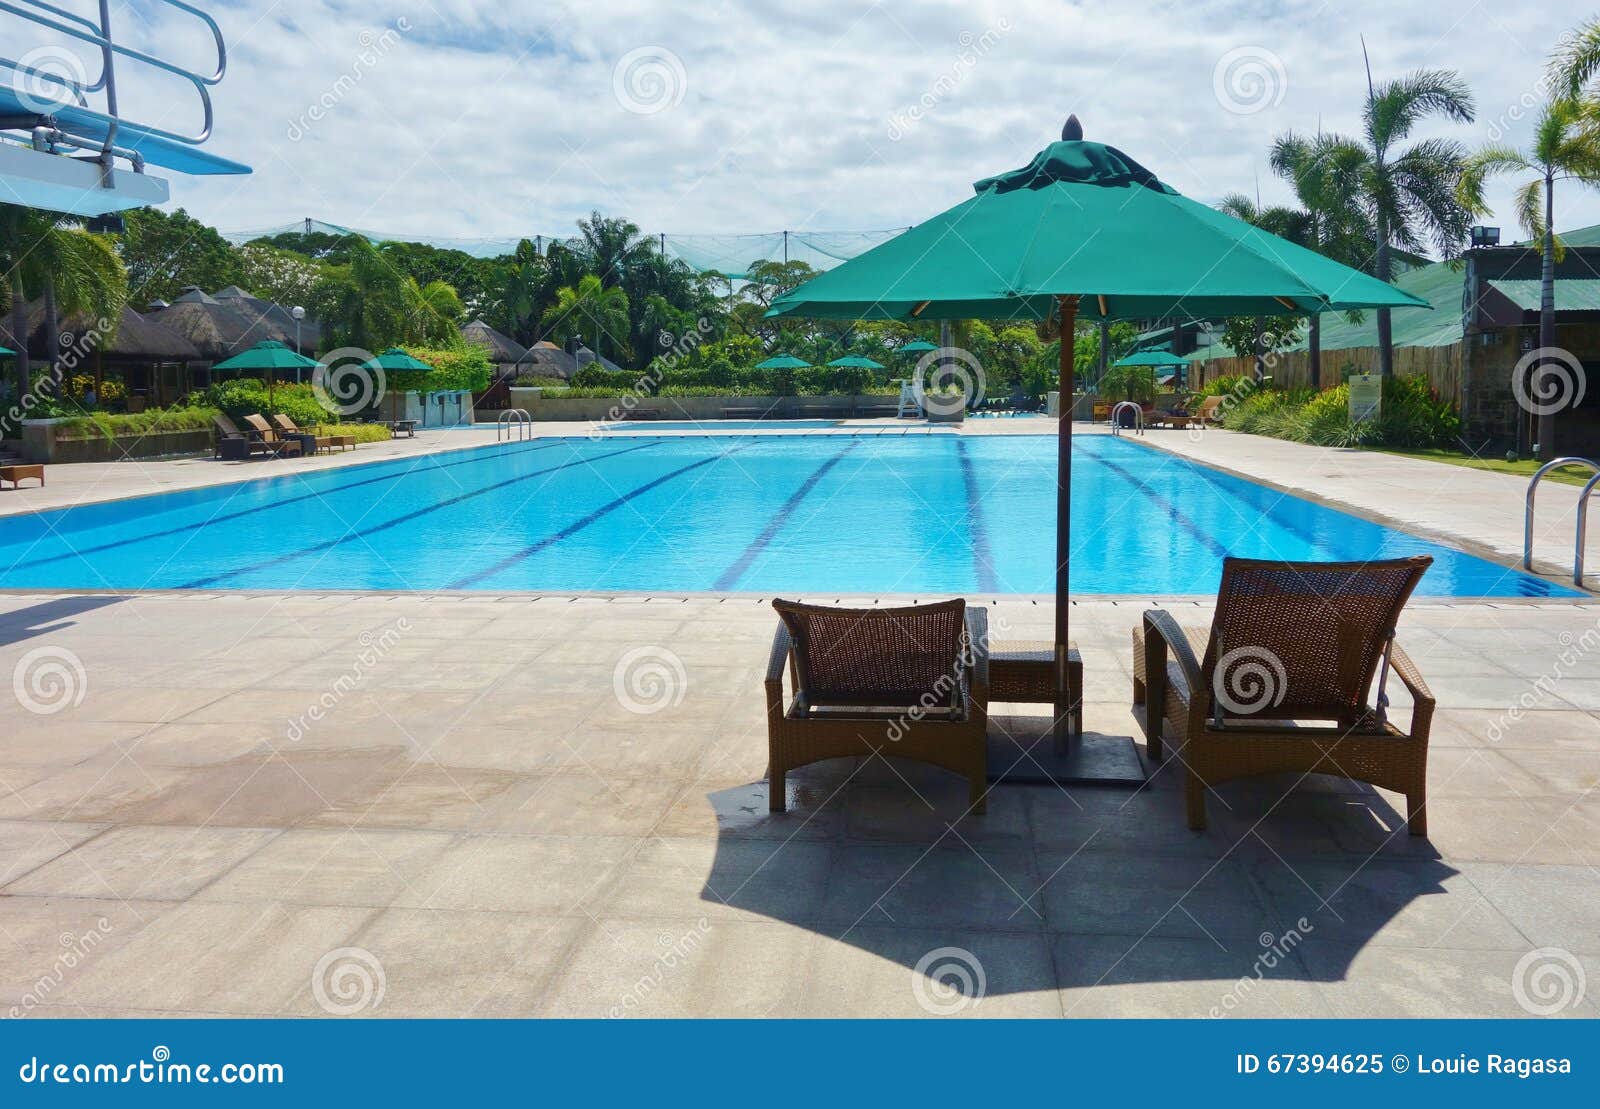 pool chair with umbrella